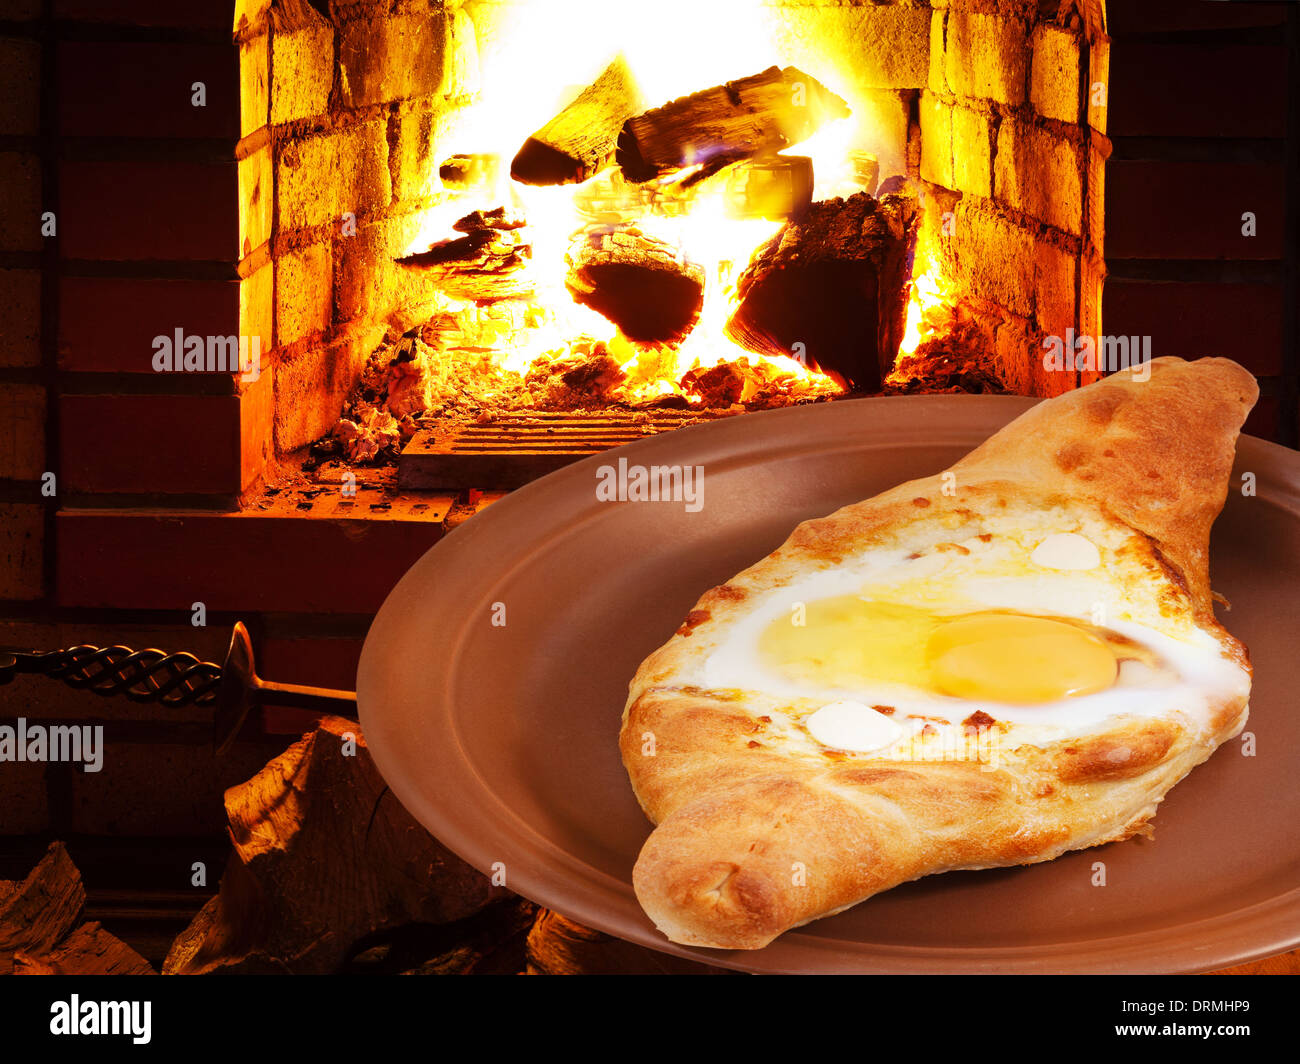 adzharia hachapuri with egg on plate and open fire in wood burning stove Stock Photo